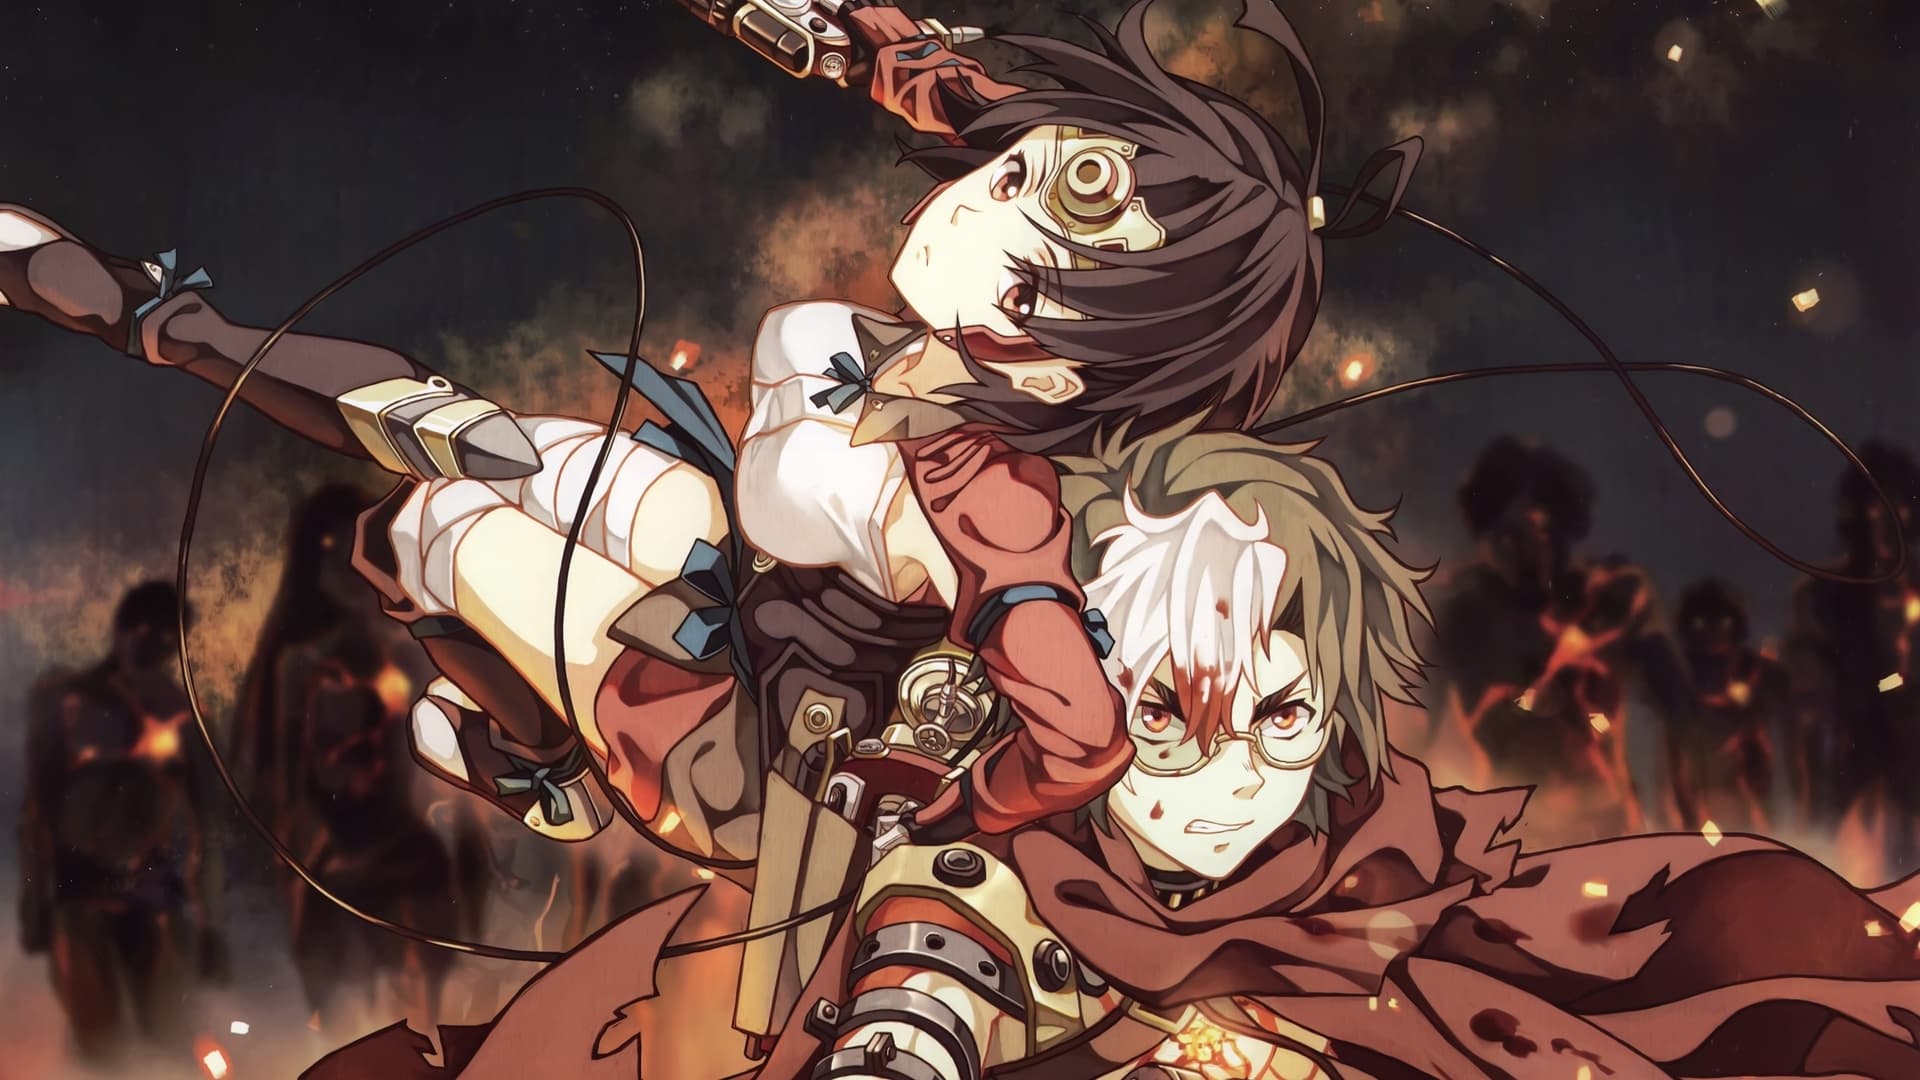 Kabaneri of the Iron Fortress: The Battle of Unato (2019)